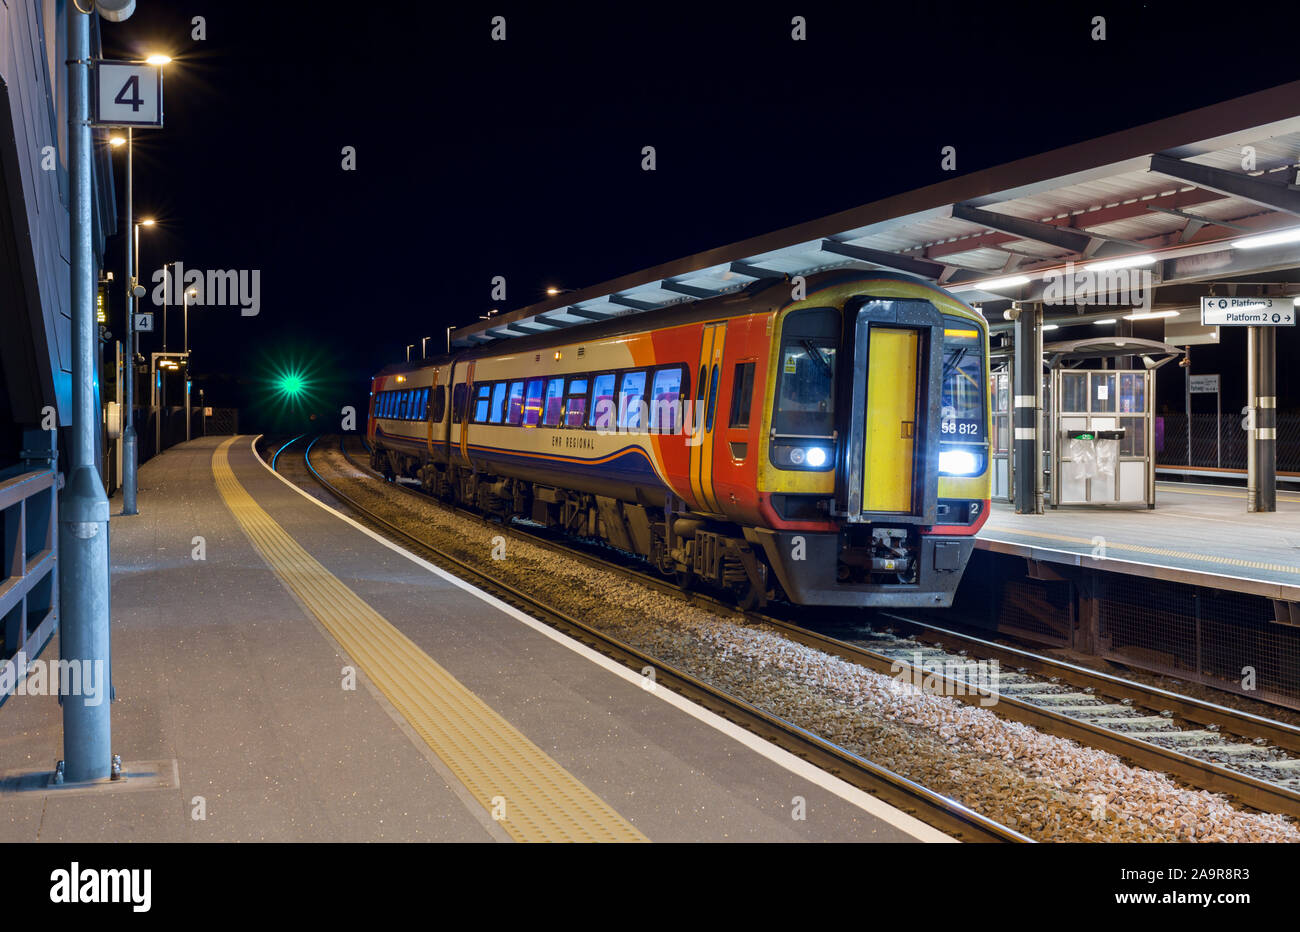 East Midlands railway class 158 sprinter train calling at East Midlands Parkway station  (Ratcliffe On Soar) on a dark night. Stock Photo